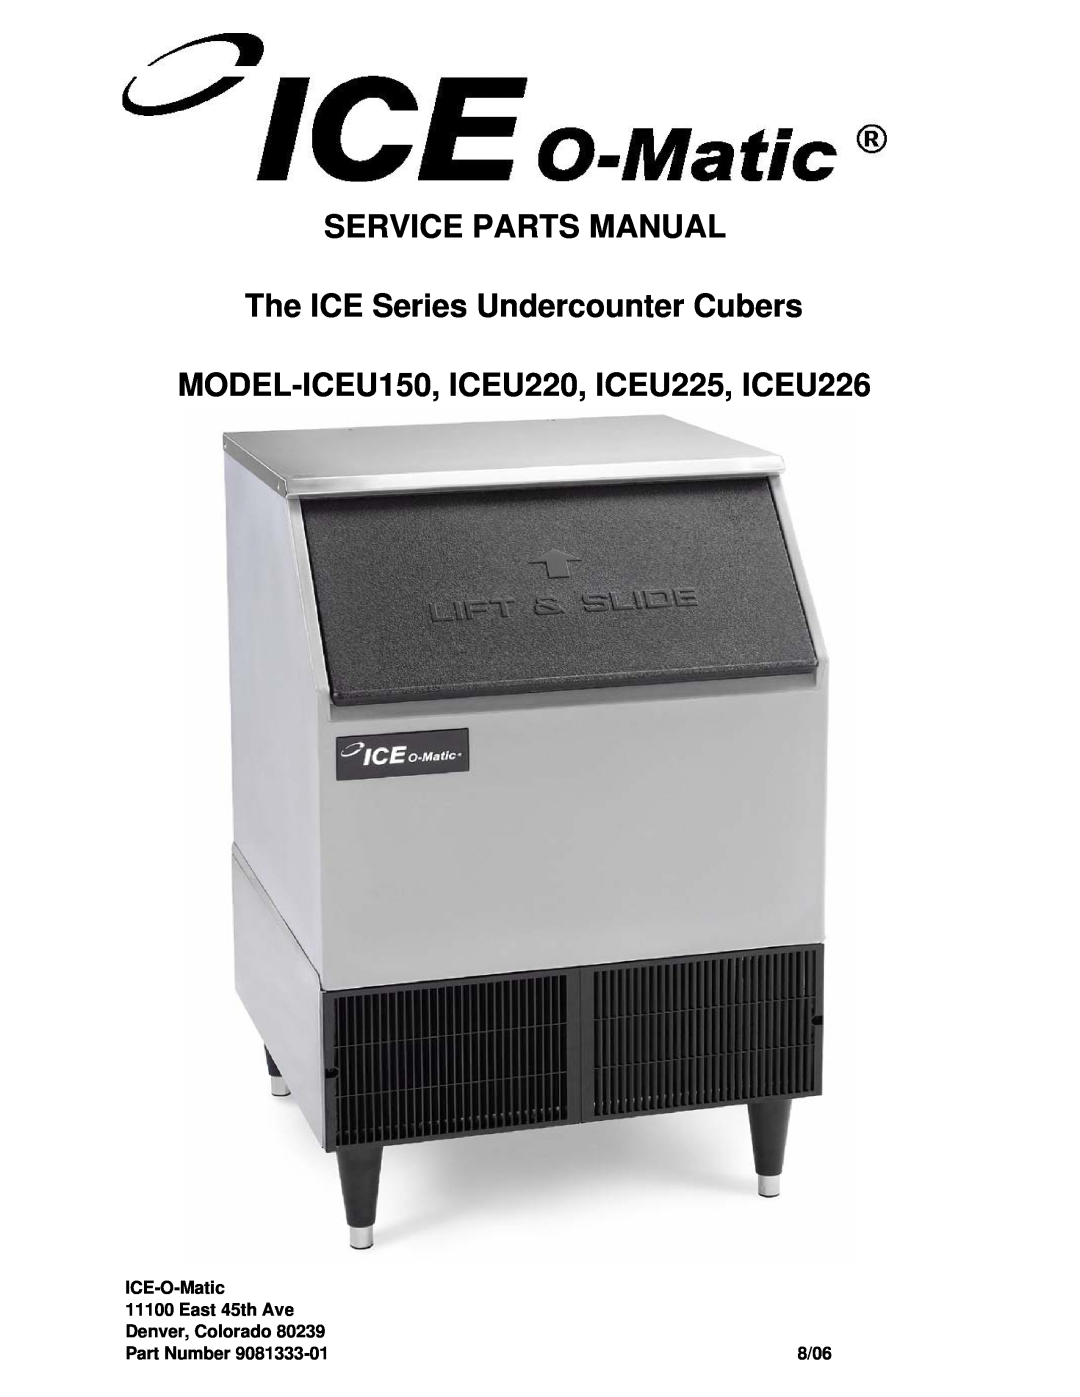 Ice-O-Matic ICEU150 manual Service Parts Manual, The ICE Series Undercounter Cubers, ICE-O-Matic, East 45th Ave, 8/06 